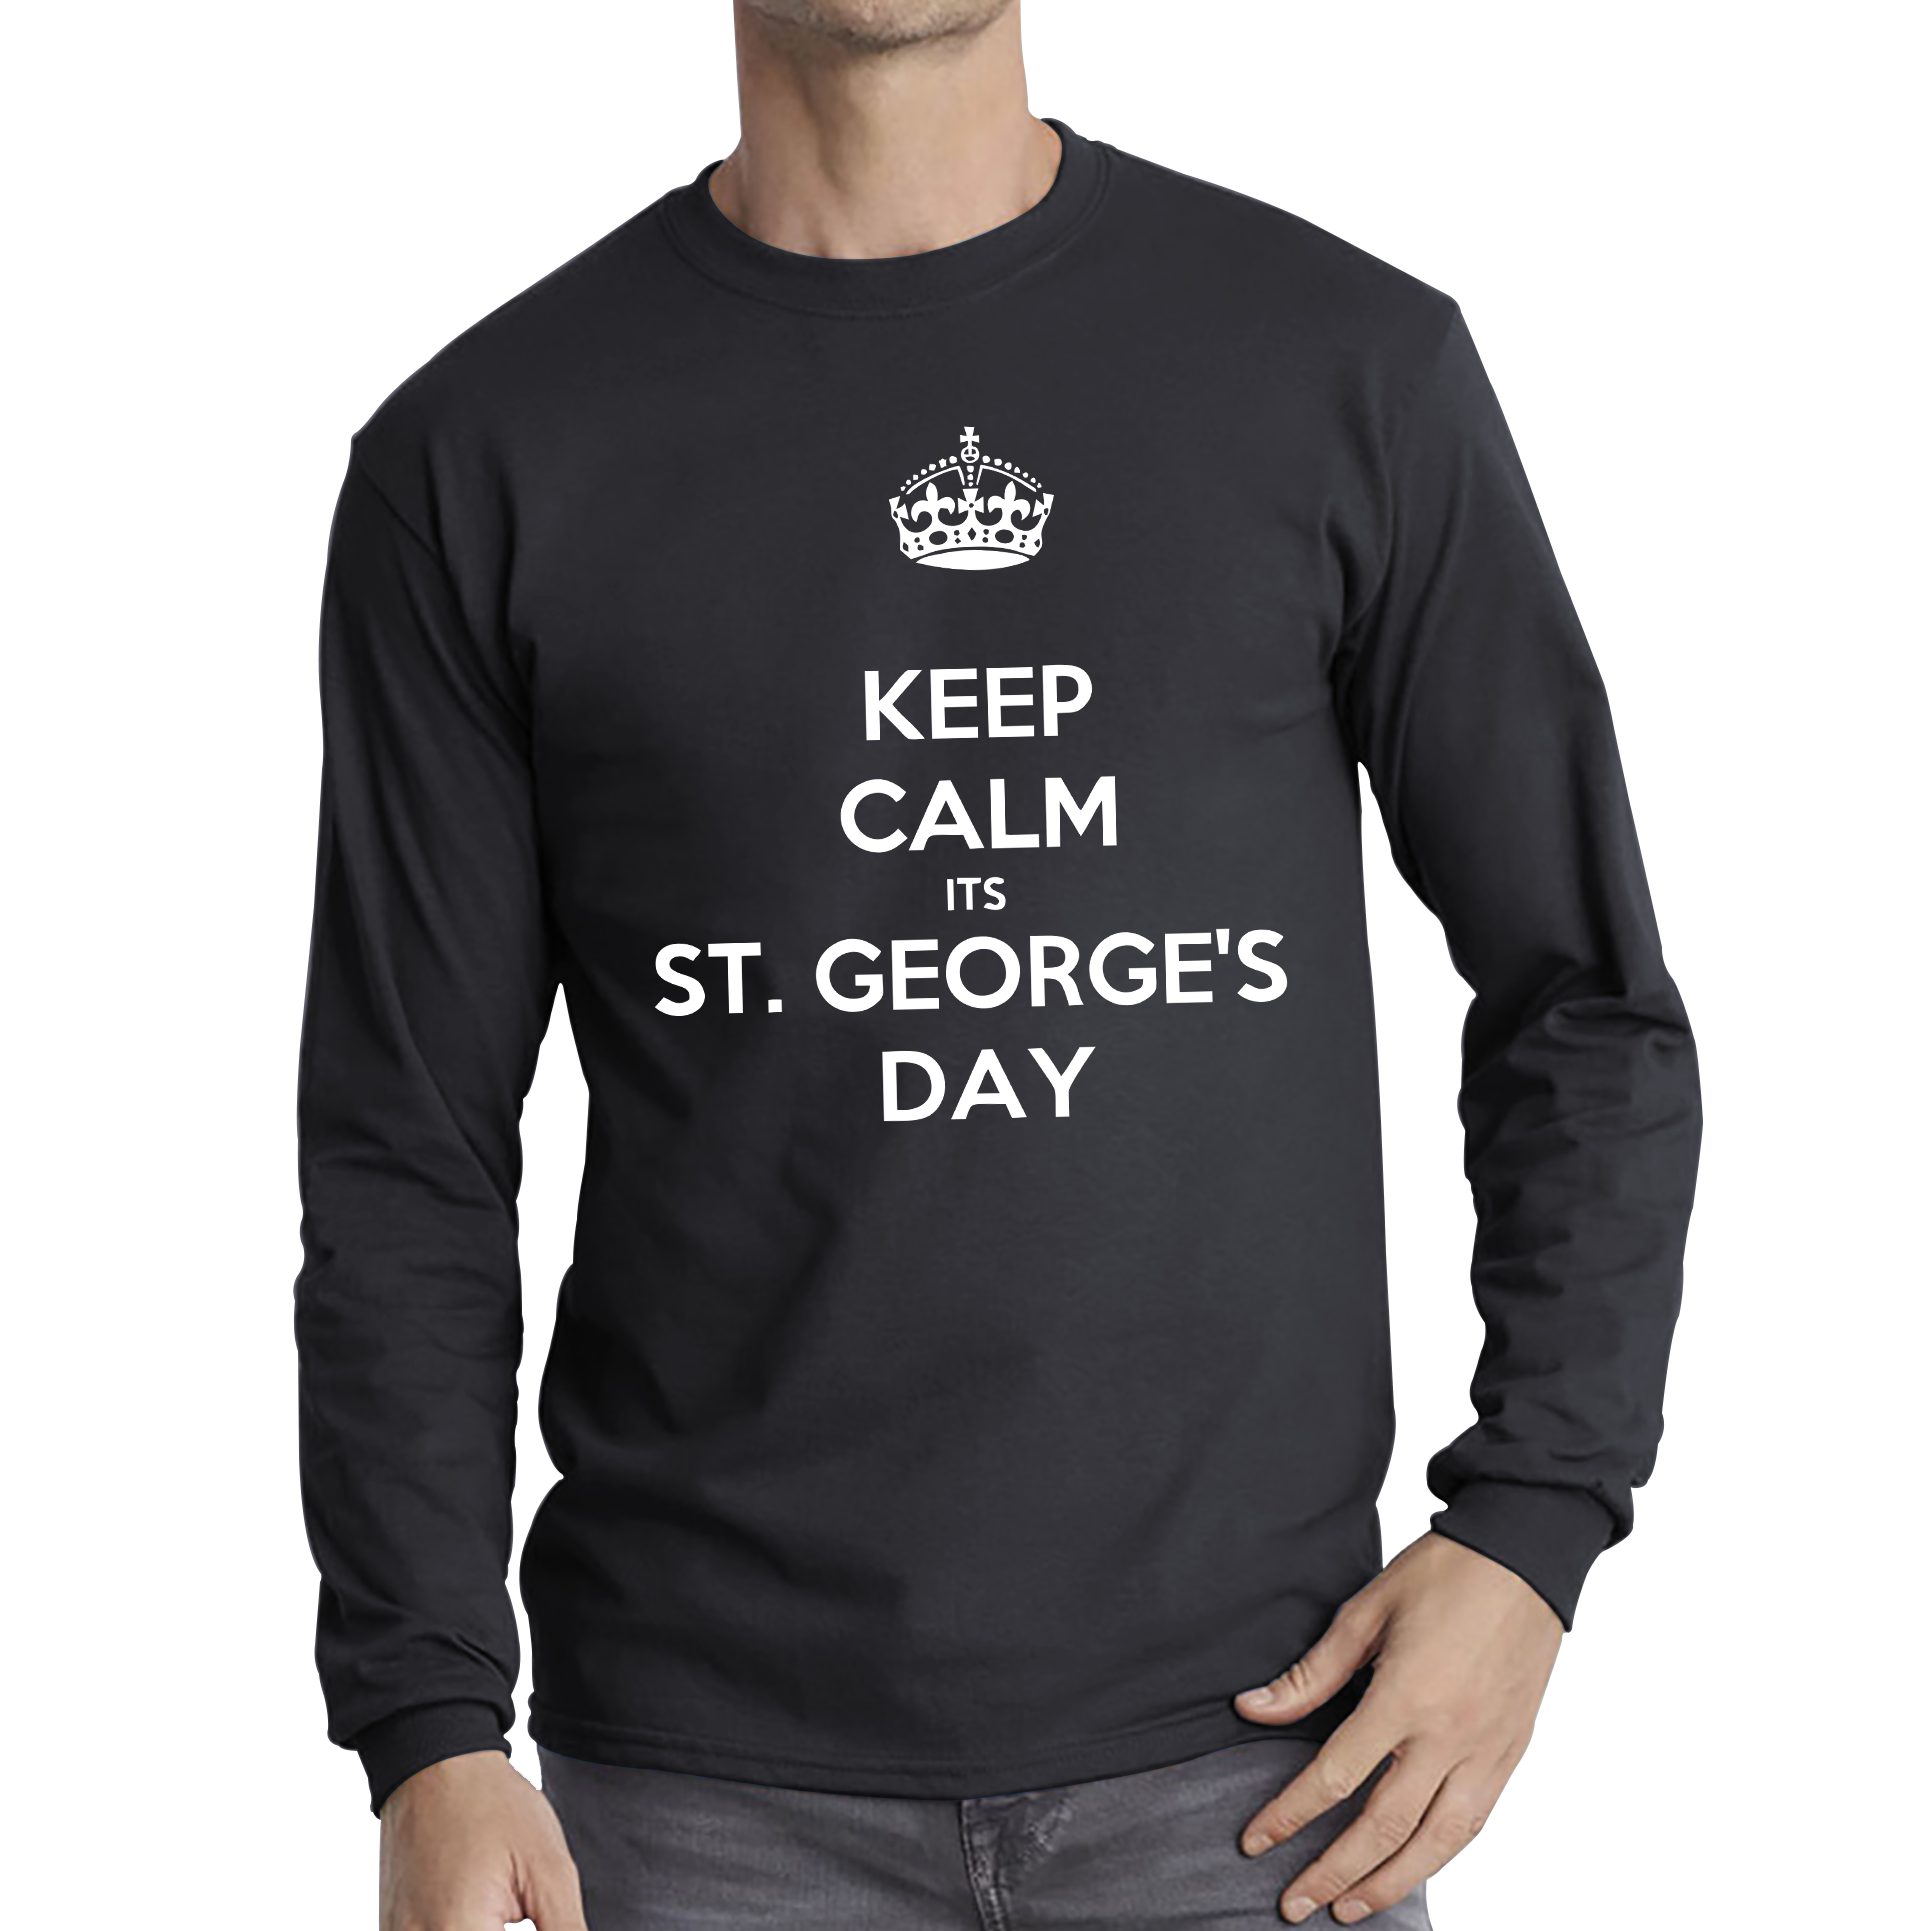 Keep Calm Its St. George's Day Adult Long Sleeve T Shirt